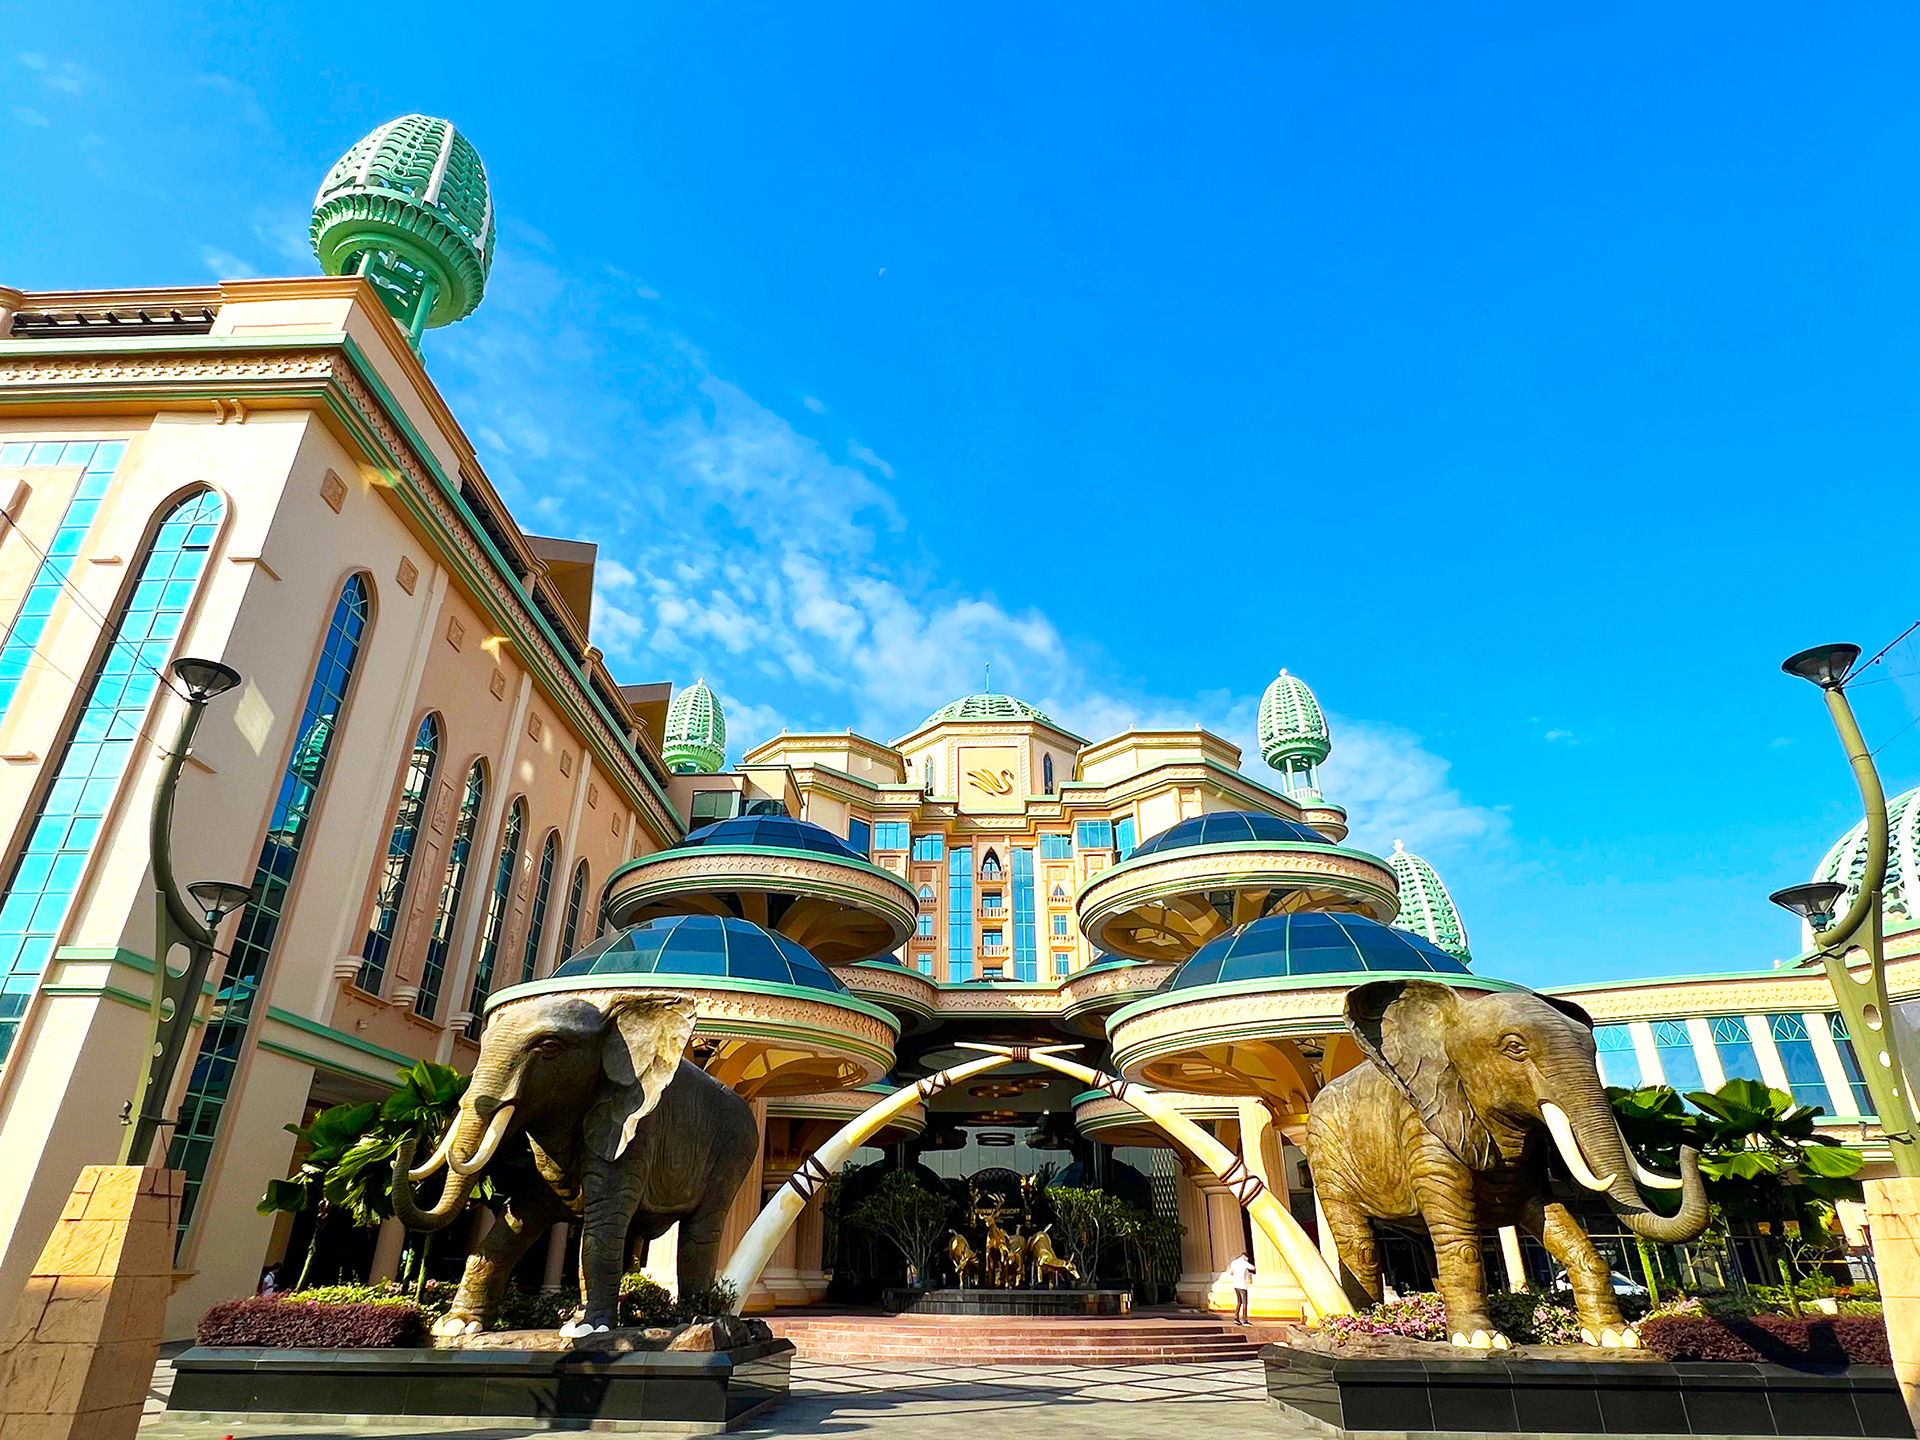 Sunway Resort Hotel welcomes you with the grandest entrance upon your arrival. 